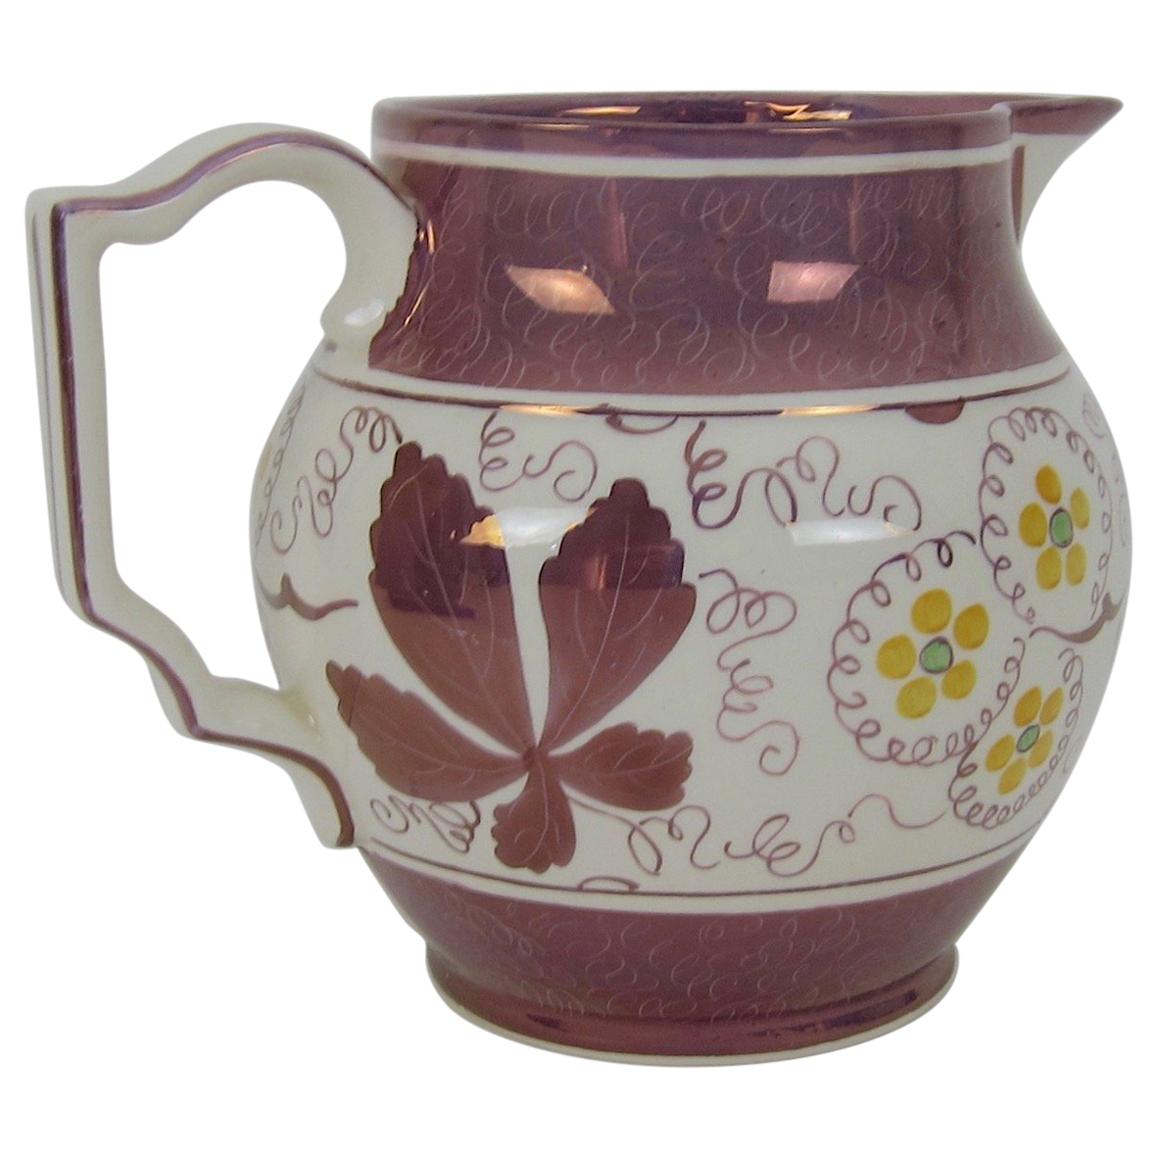 Gray's Pottery Stoke-on-Trent Hand Painted Lusterware Pitcher